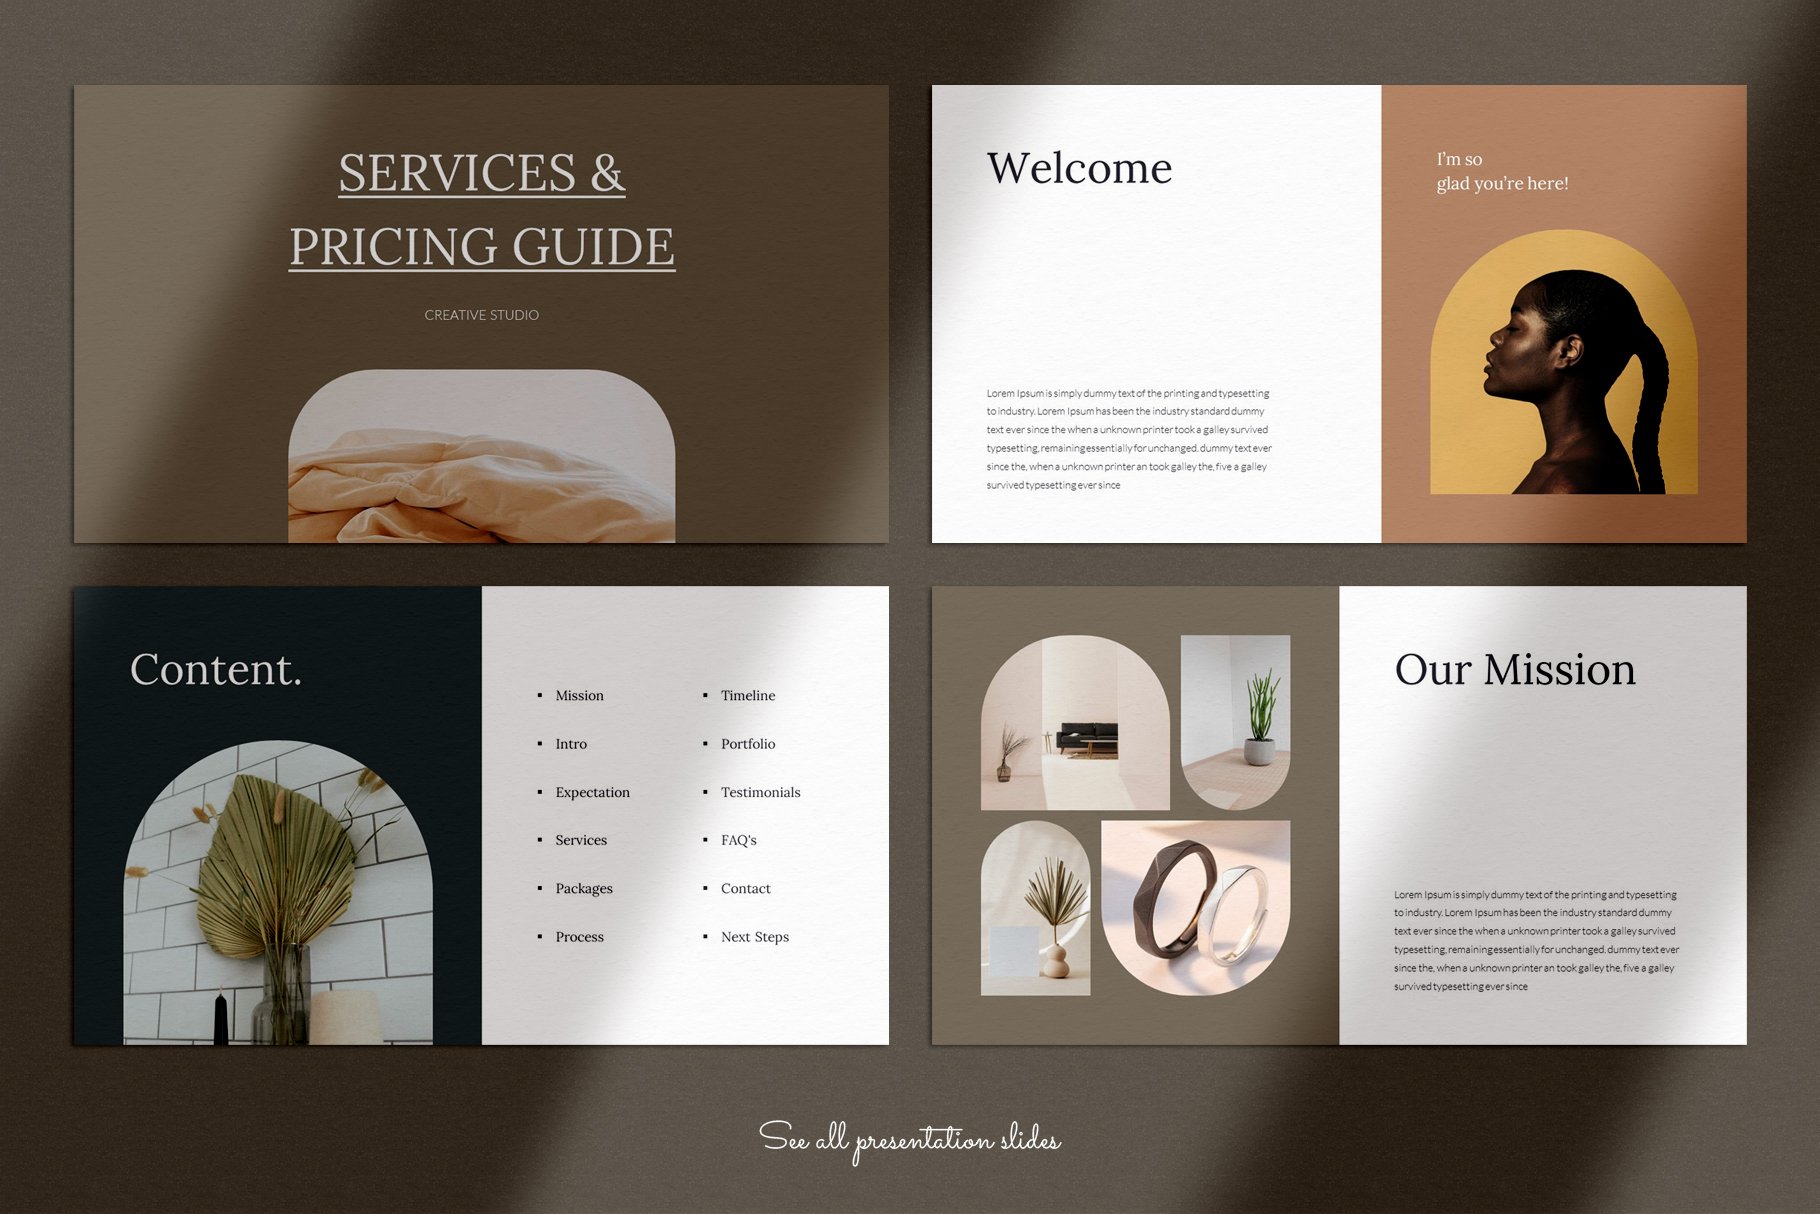 Services & Pricing Guide preview image.